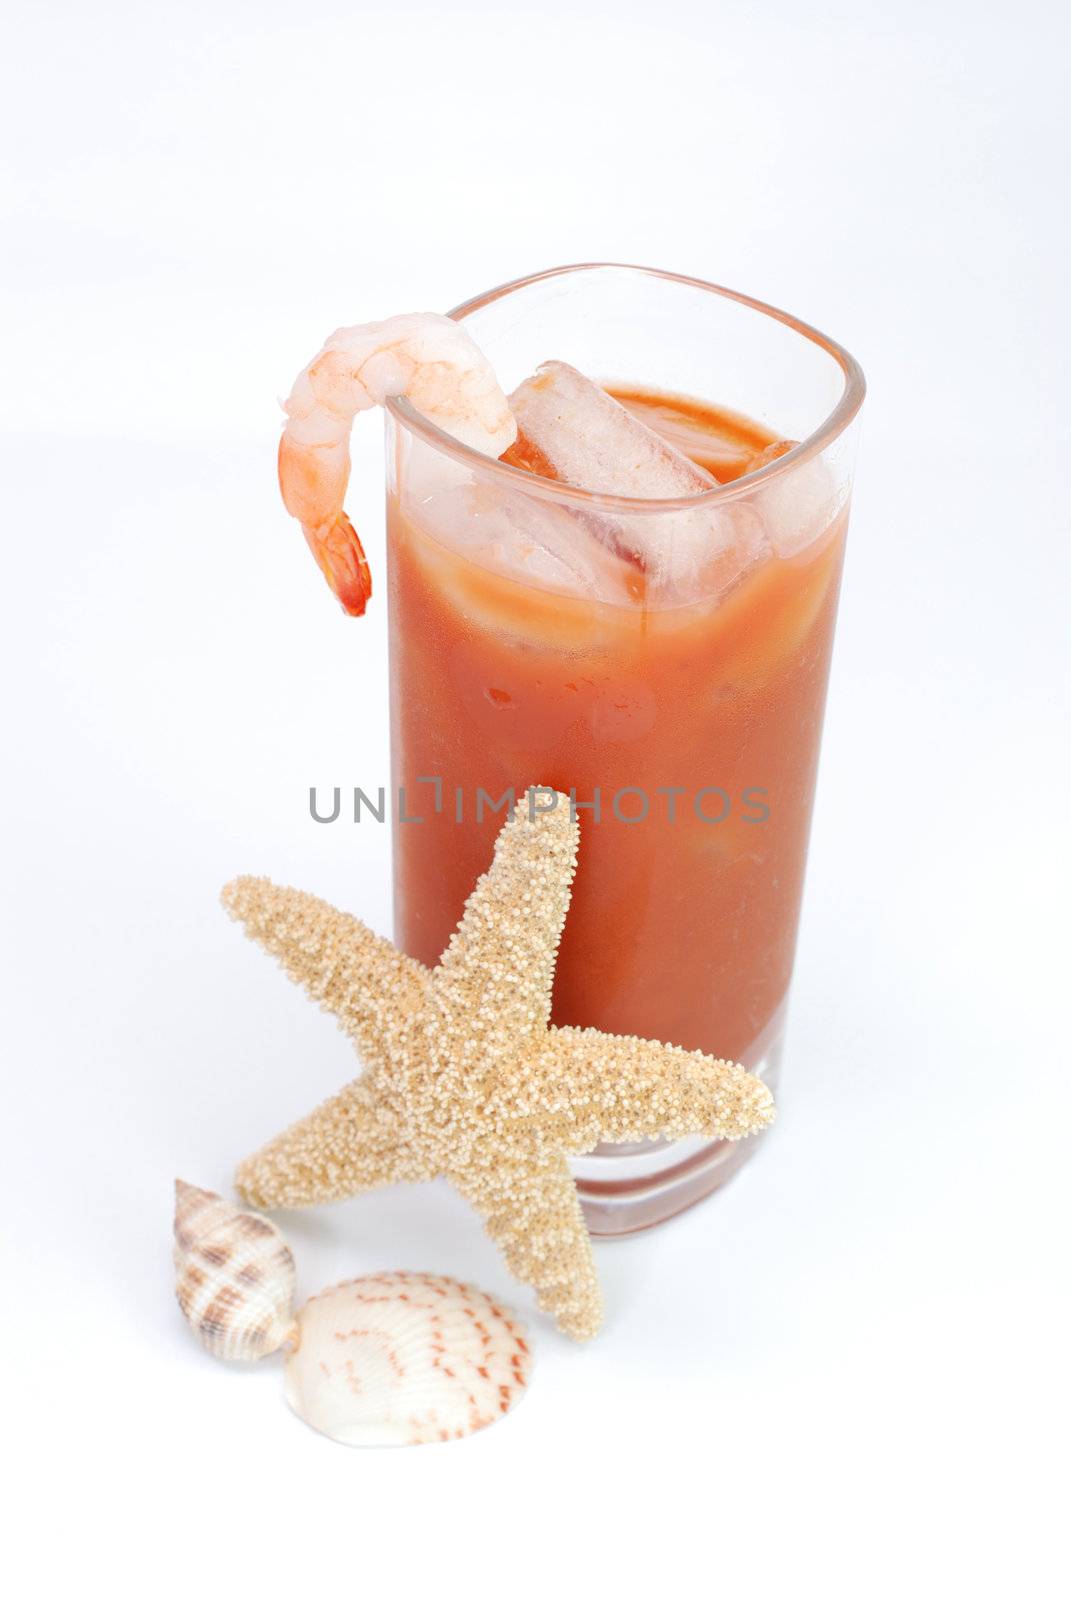 Bloody Mary with shrimp, starfish, and seashells.  Isolated on white.